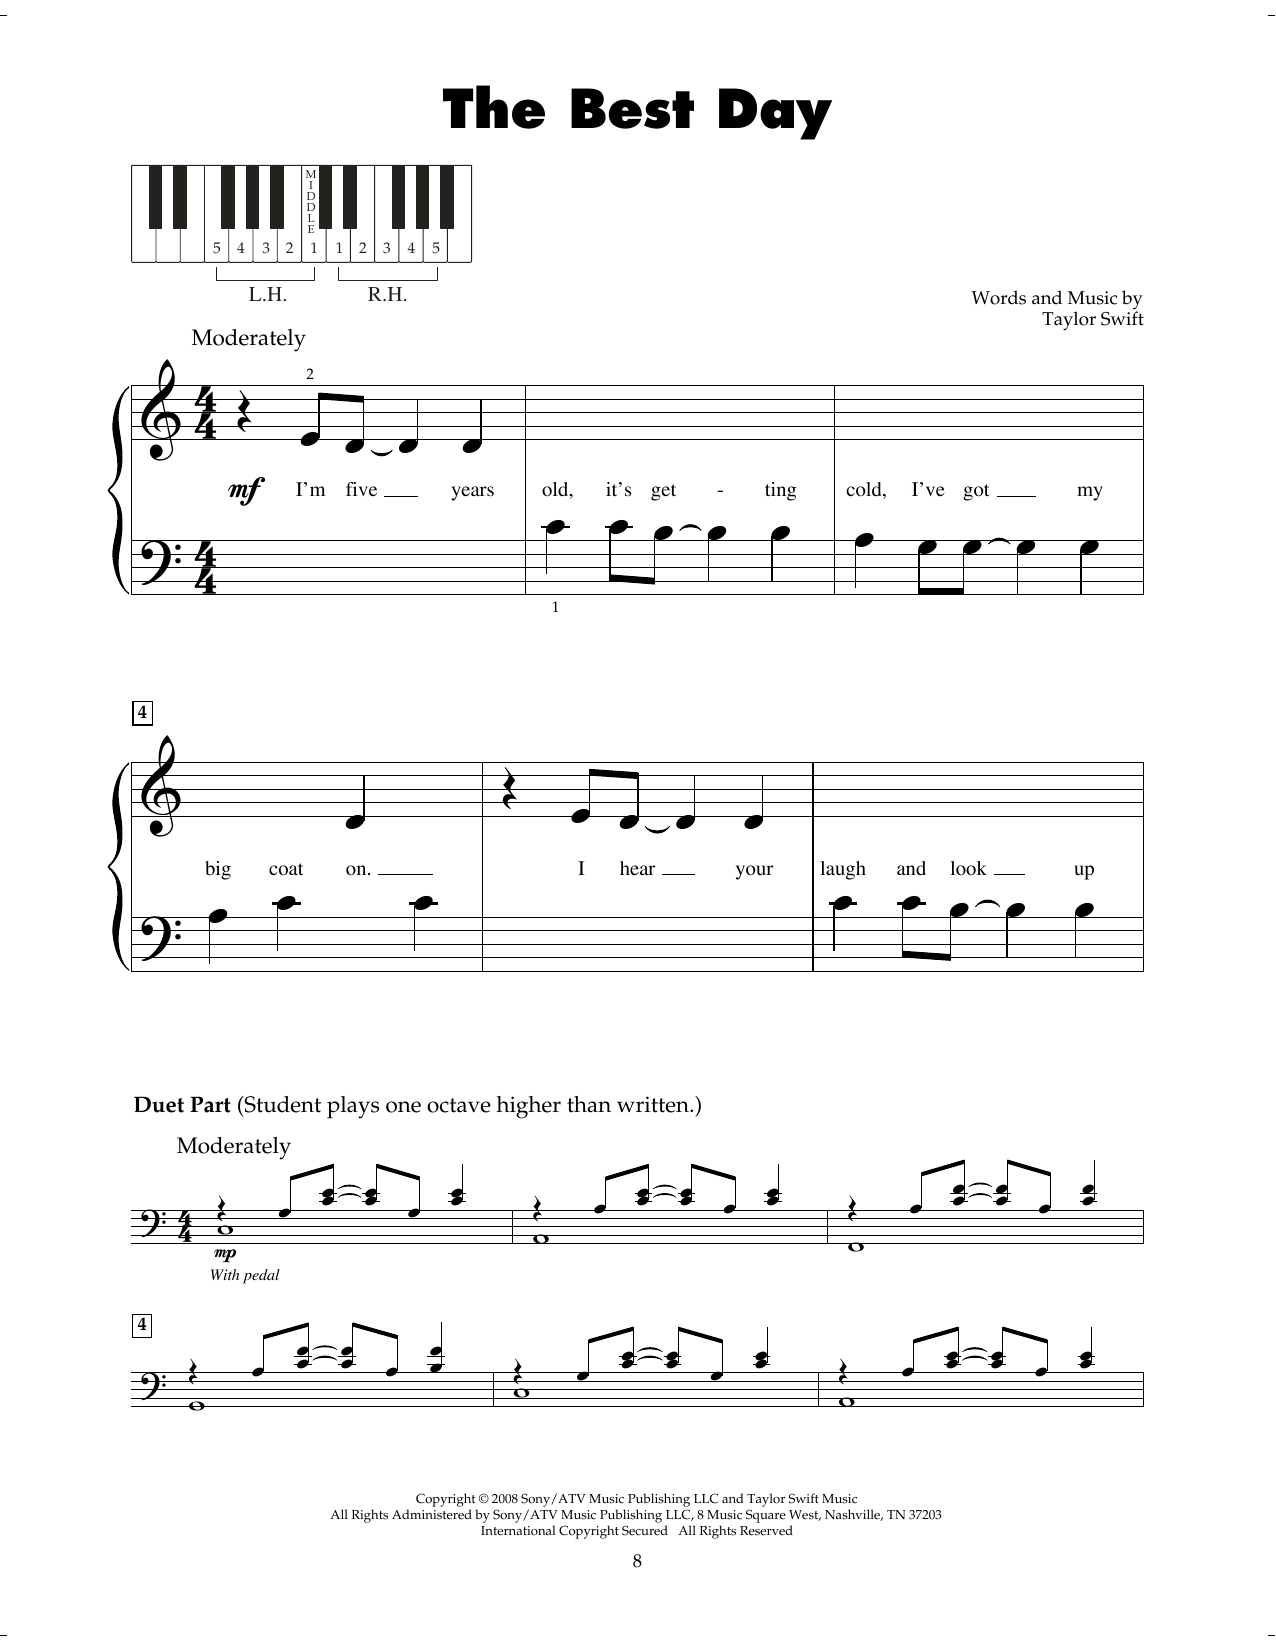 Download Taylor Swift The Best Day Sheet Music